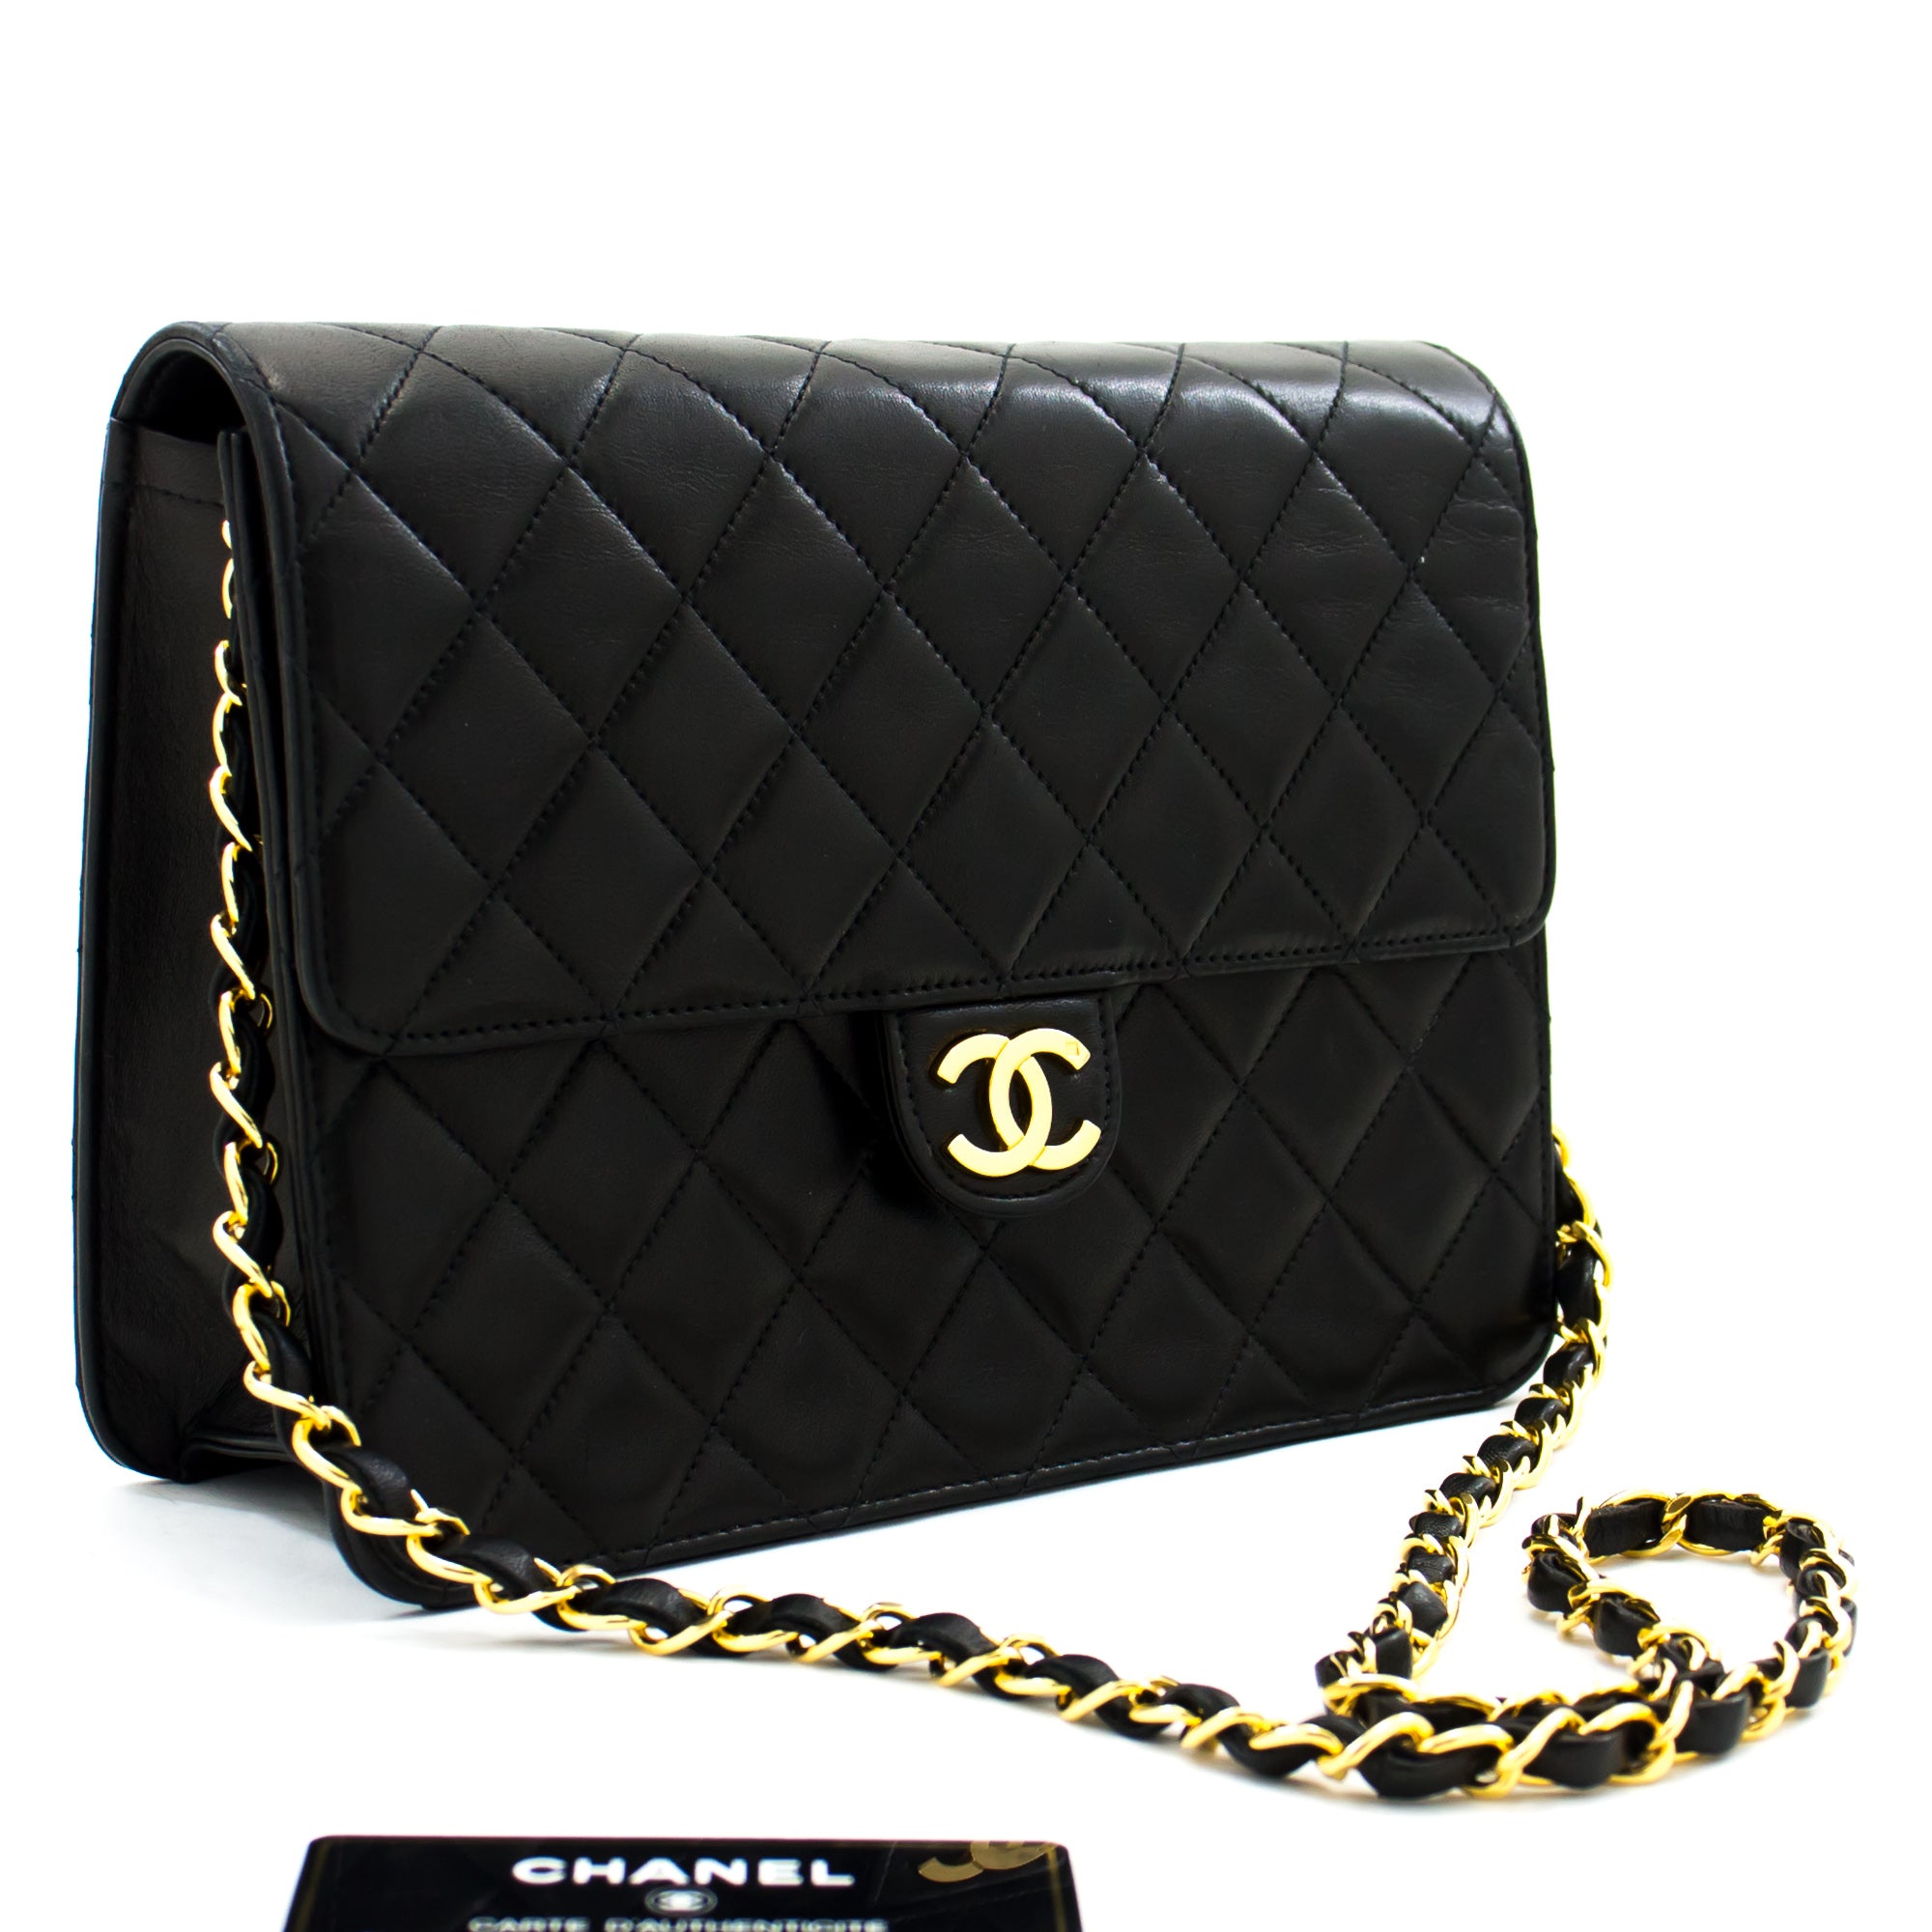 CHANEL Full Flap Chain Shoulder Bag Clutch Black Quilted